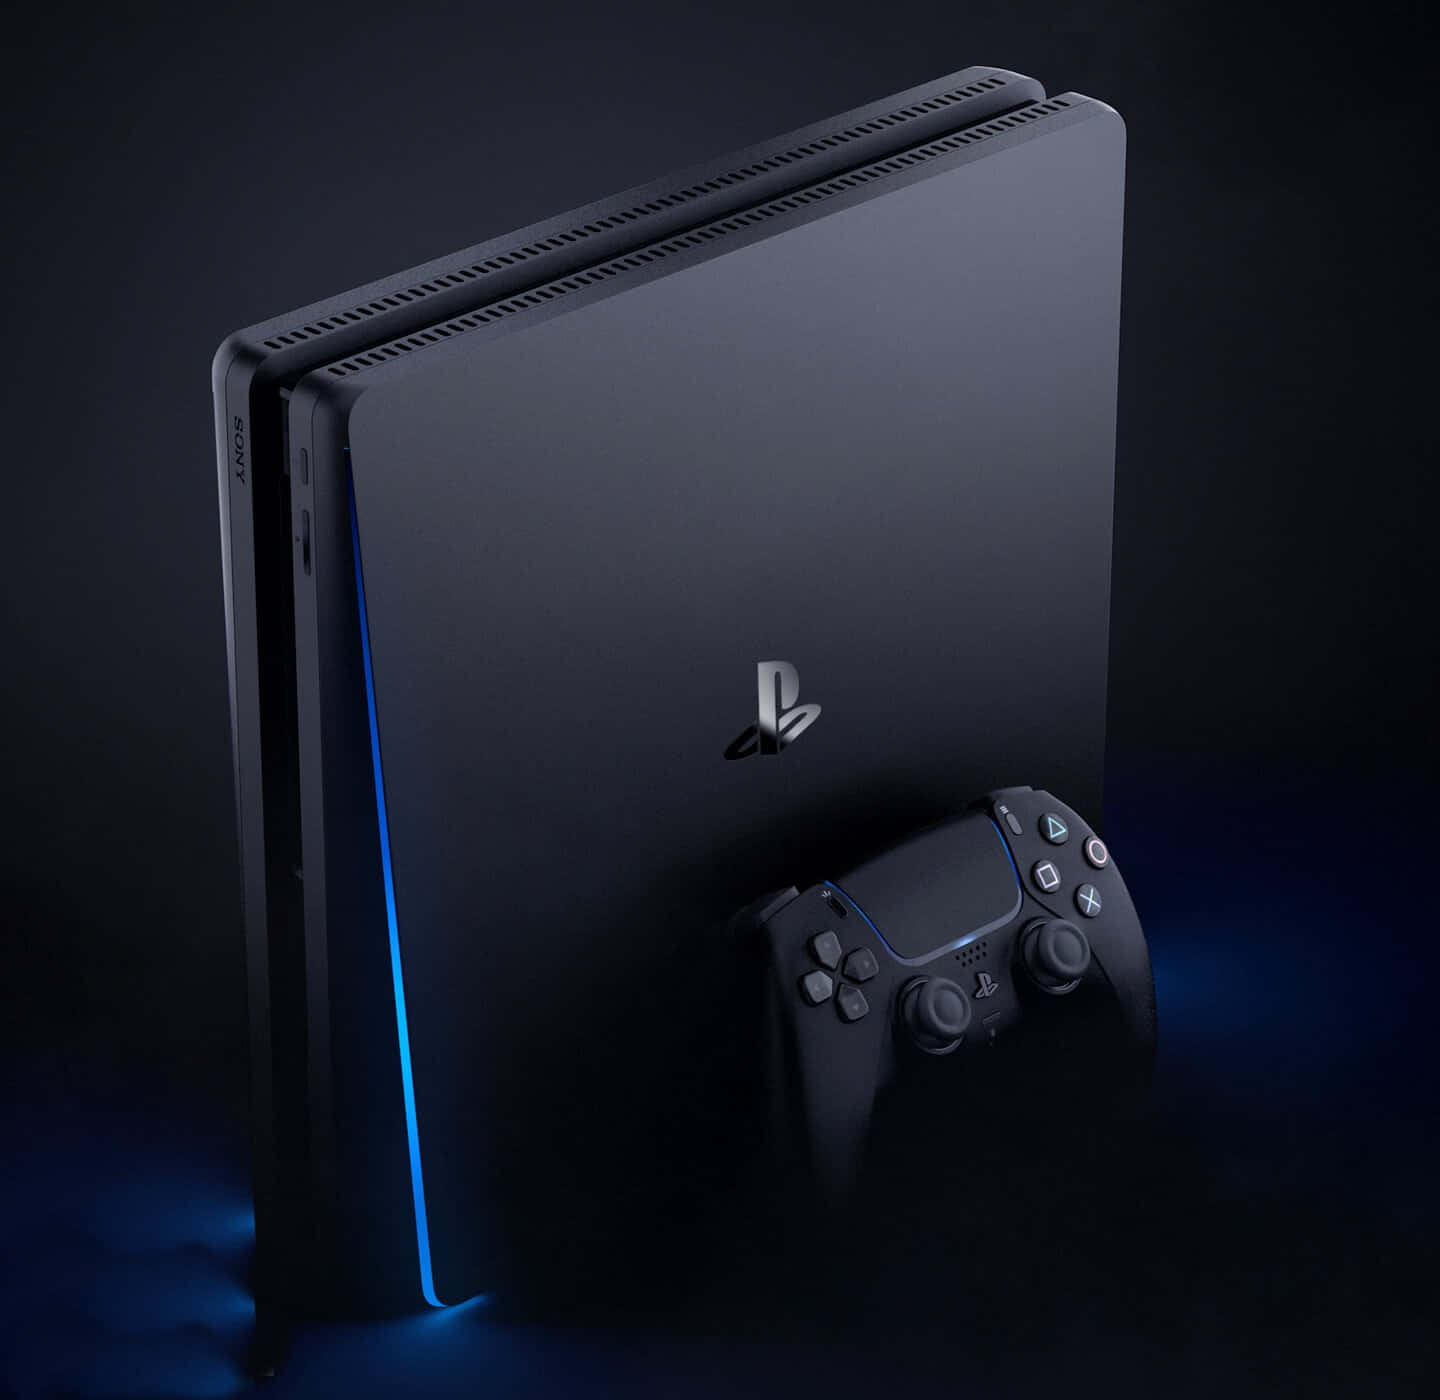 "Experience an entire new generation of gaming with the PlayStation 5"